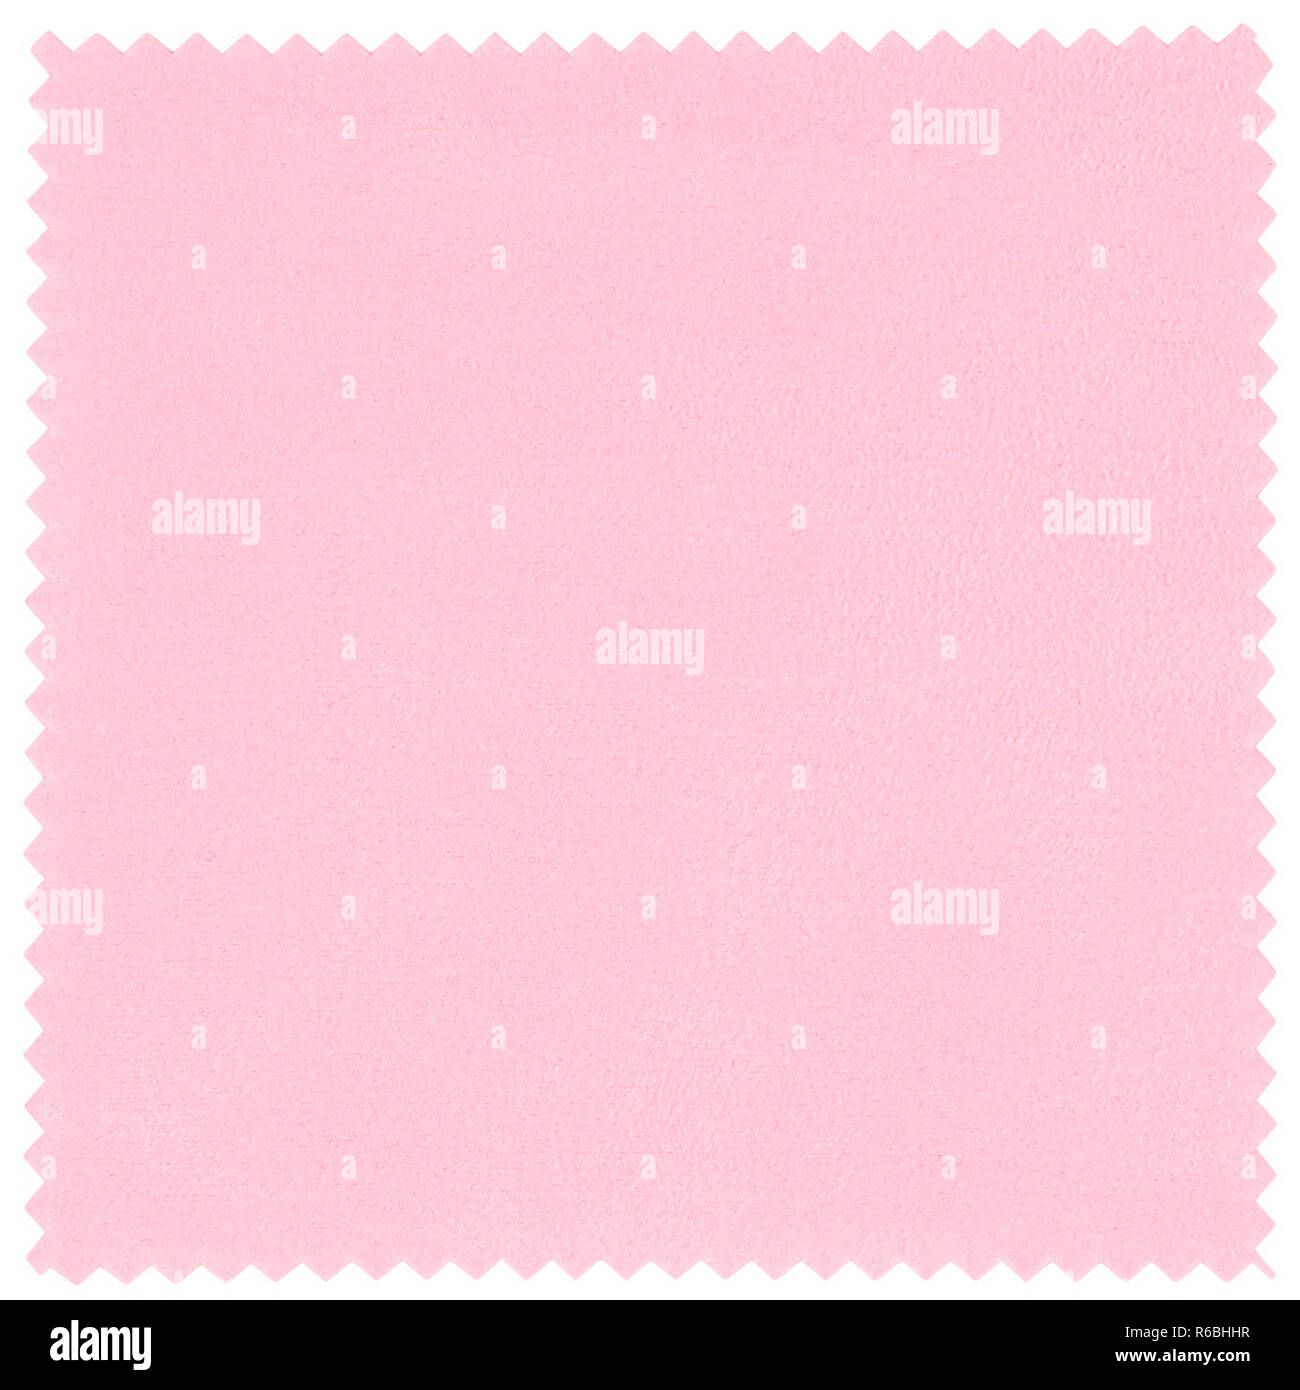 Isolated Pink Square Cloth with Jagged Edges for Glass or Screen Cleaning on White Background Stock Photo